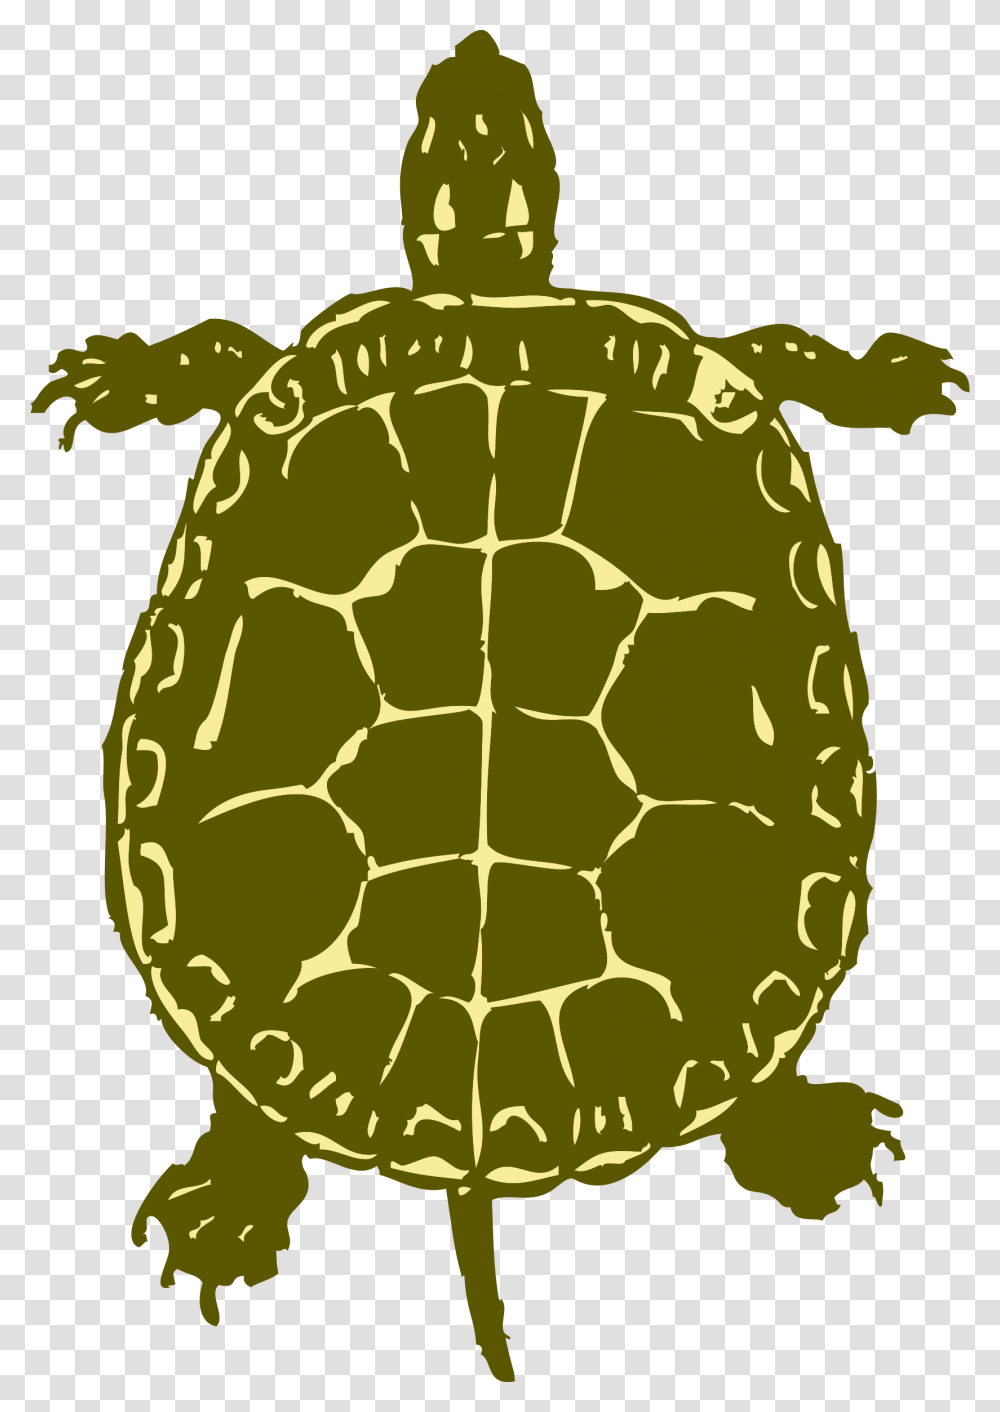 Turtle From Birds Eye View, Tortoise, Reptile, Sea Life, Animal Transparent Png